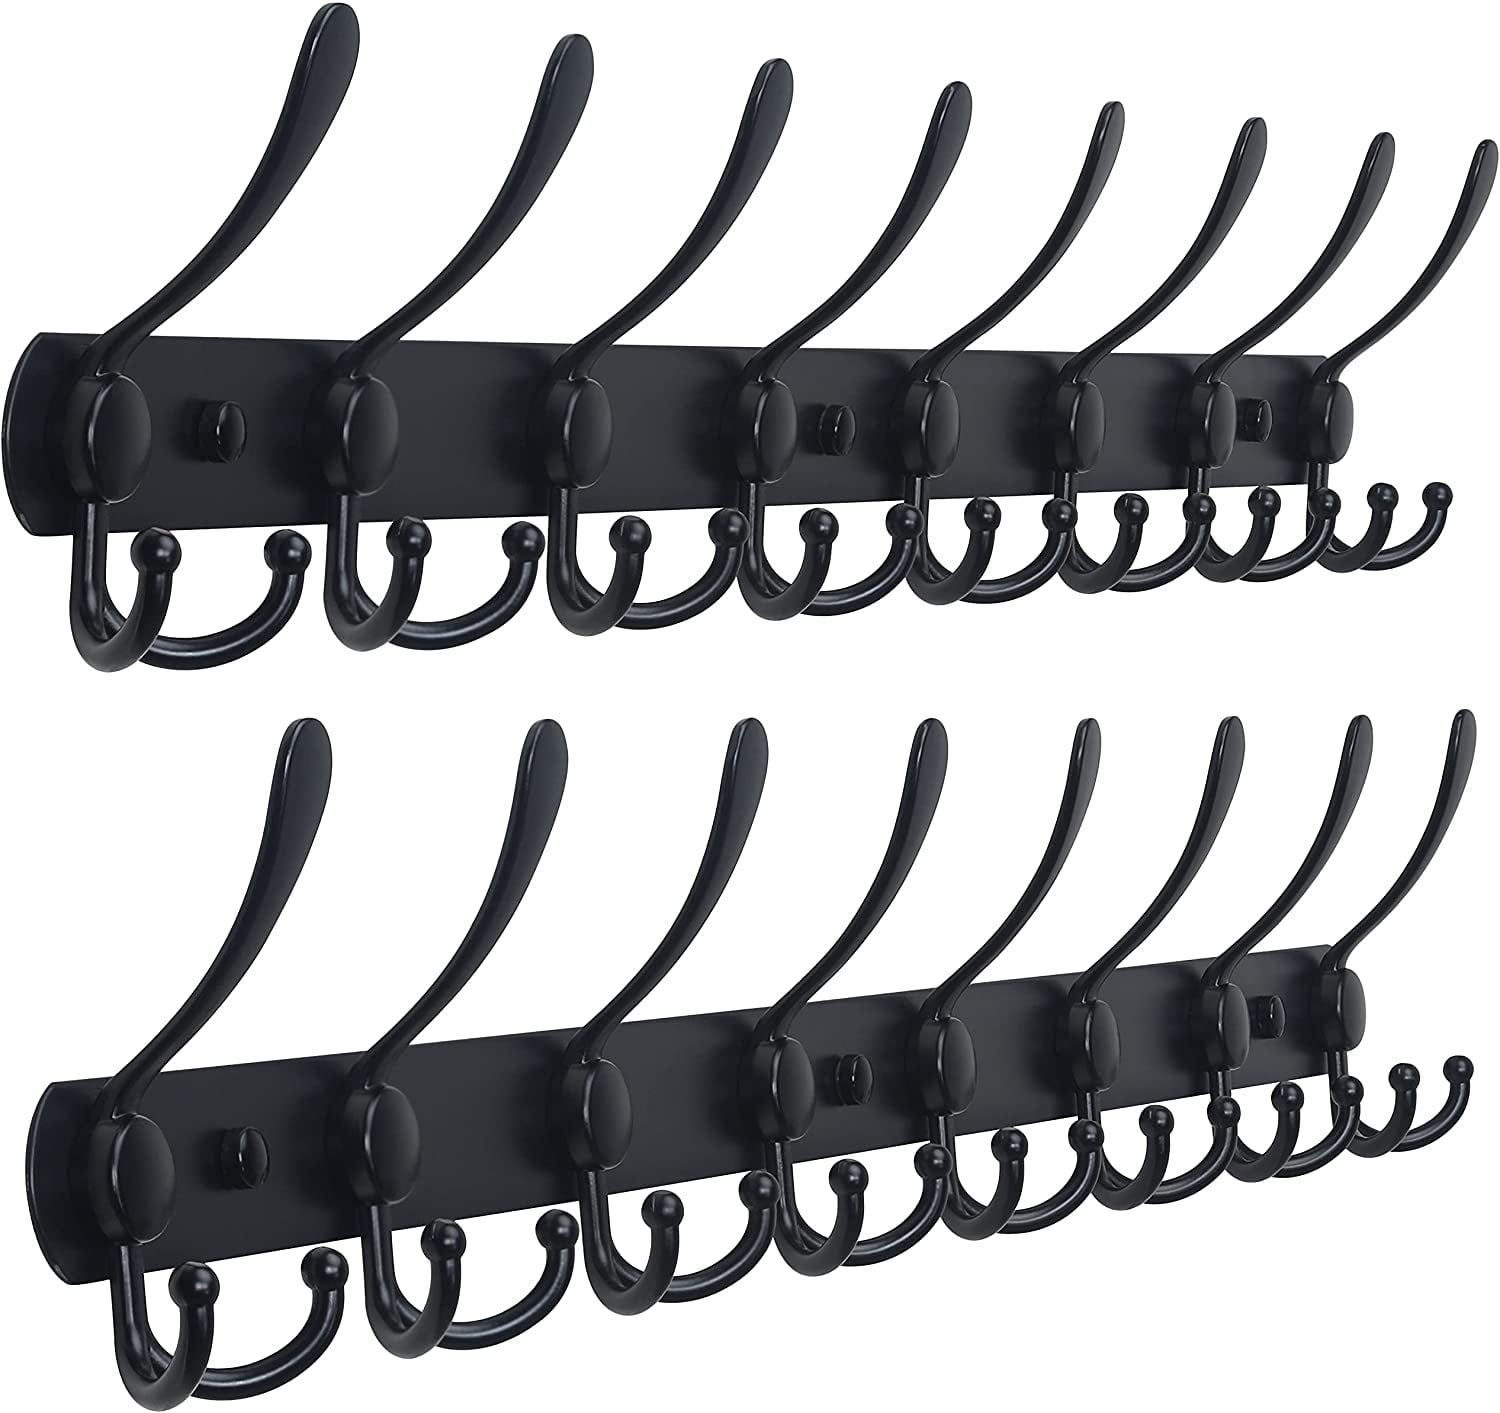 10 pack Large Heavy Duty Solid Stainless Steel Clothes Coat Hangers Drying Tools 